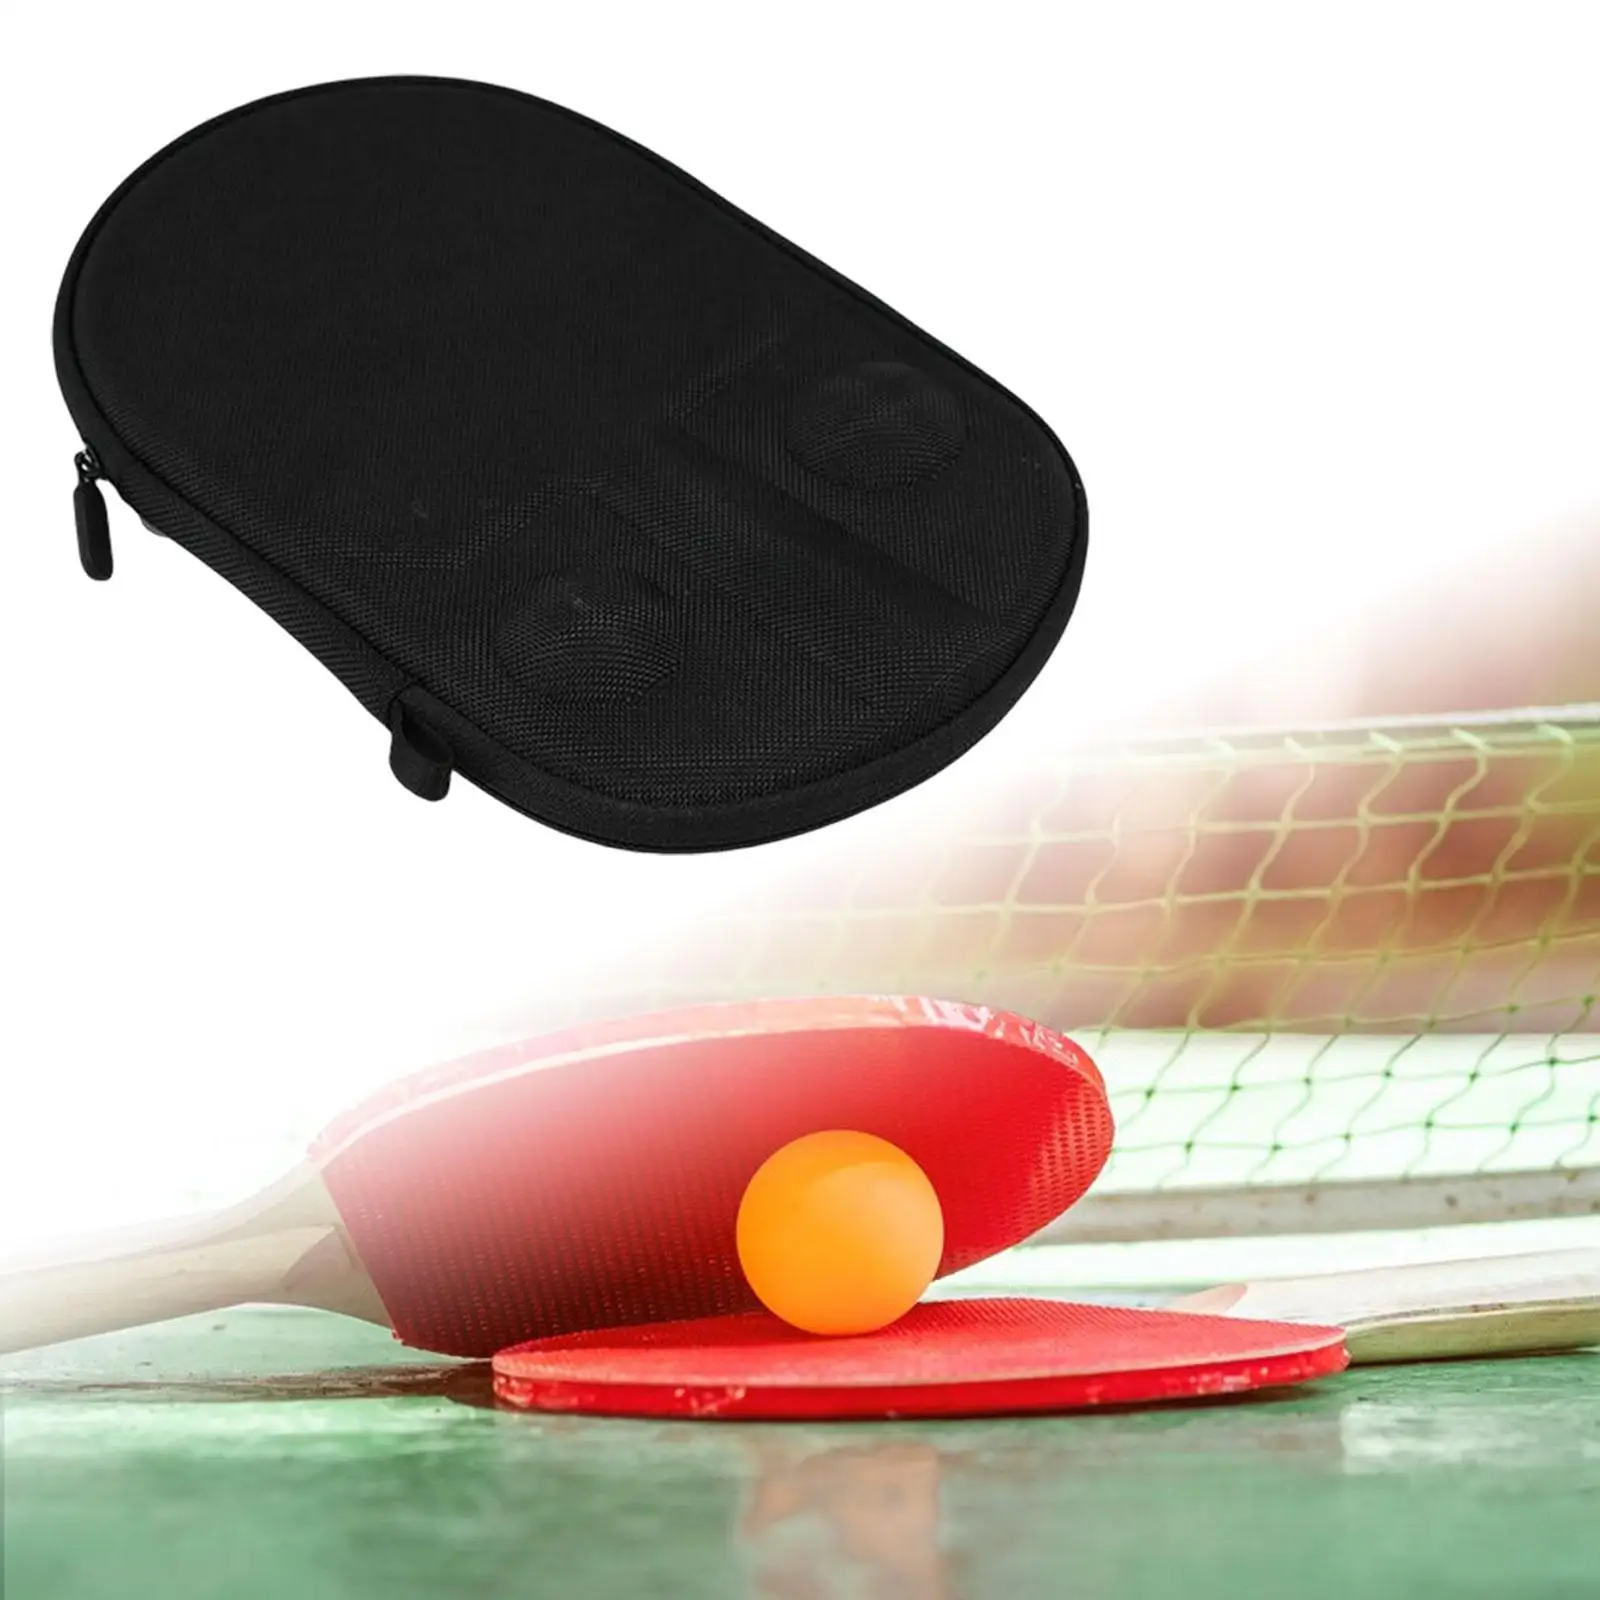 Table Tennis Racket Case Hold 1 Racket and two balls Reusable for Competition